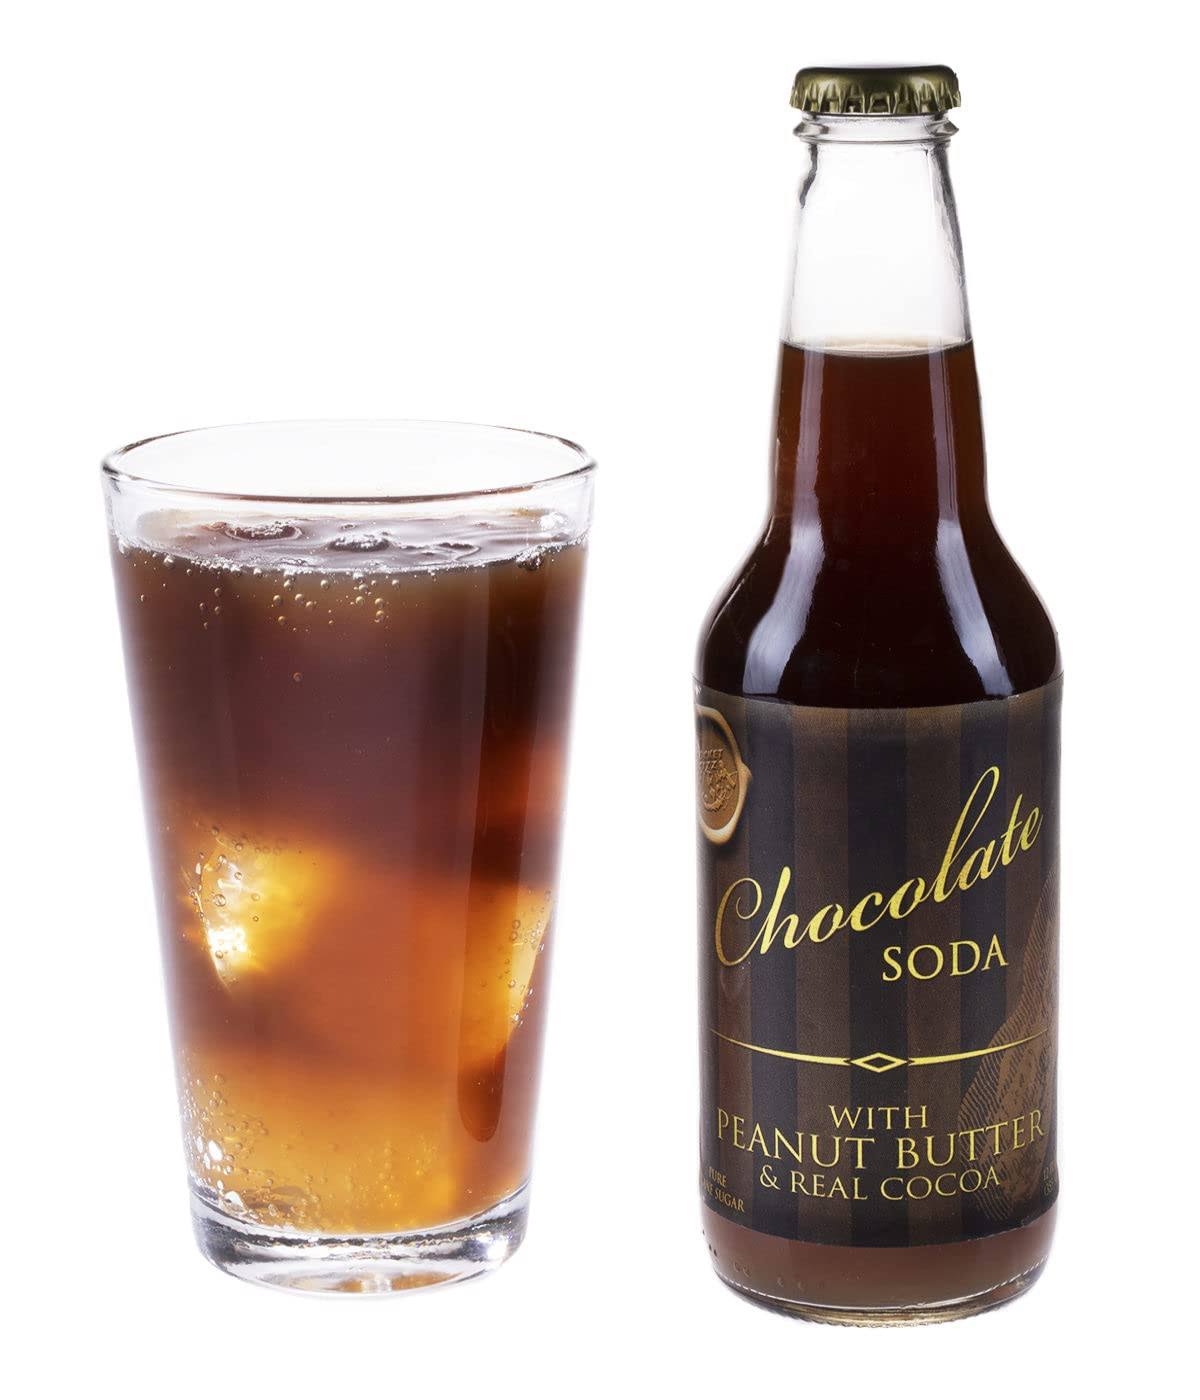 Gourmet Chocolate with Peanut Butter Soda